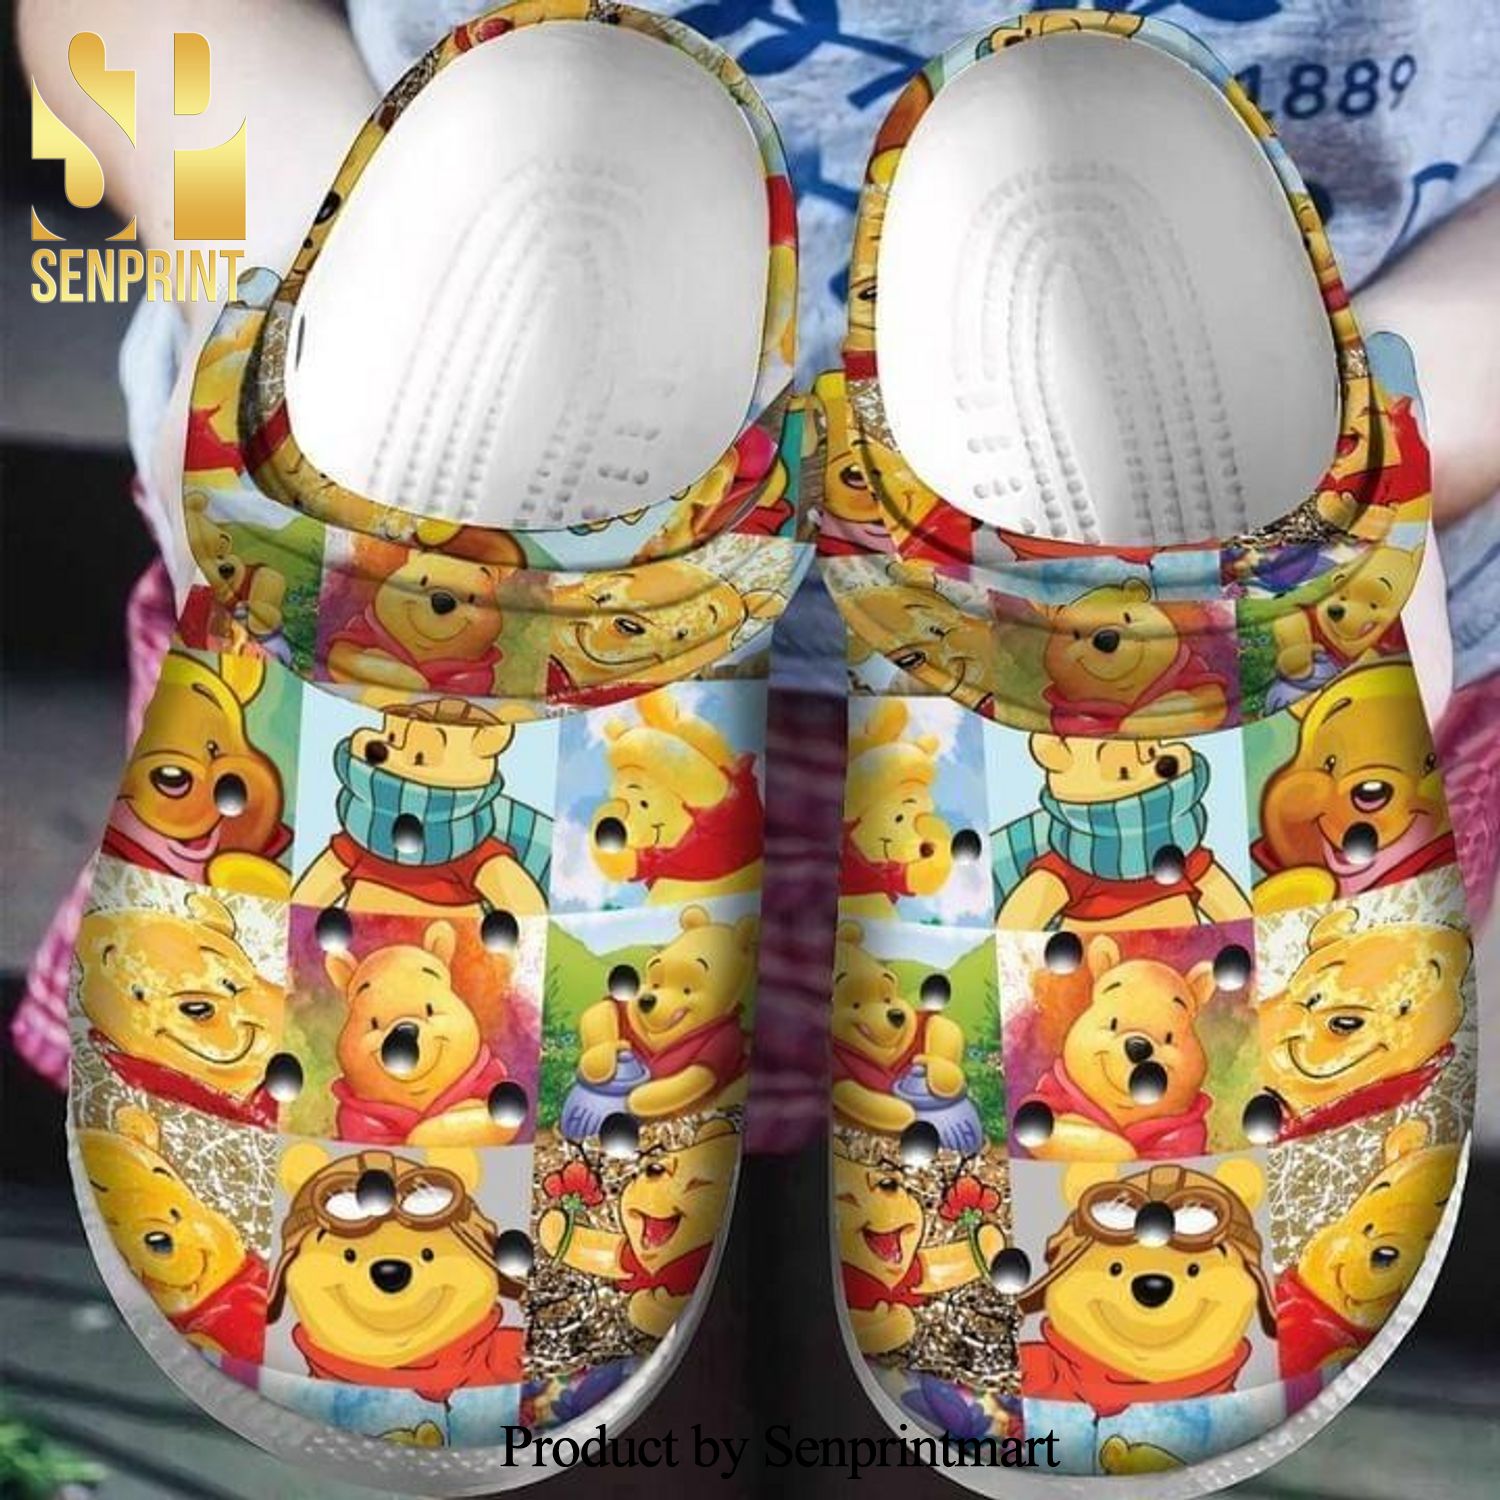 Bear Pooh Funny Winnie-The-Pooh For Lover Street Style Crocs Crocband Adult Clogs